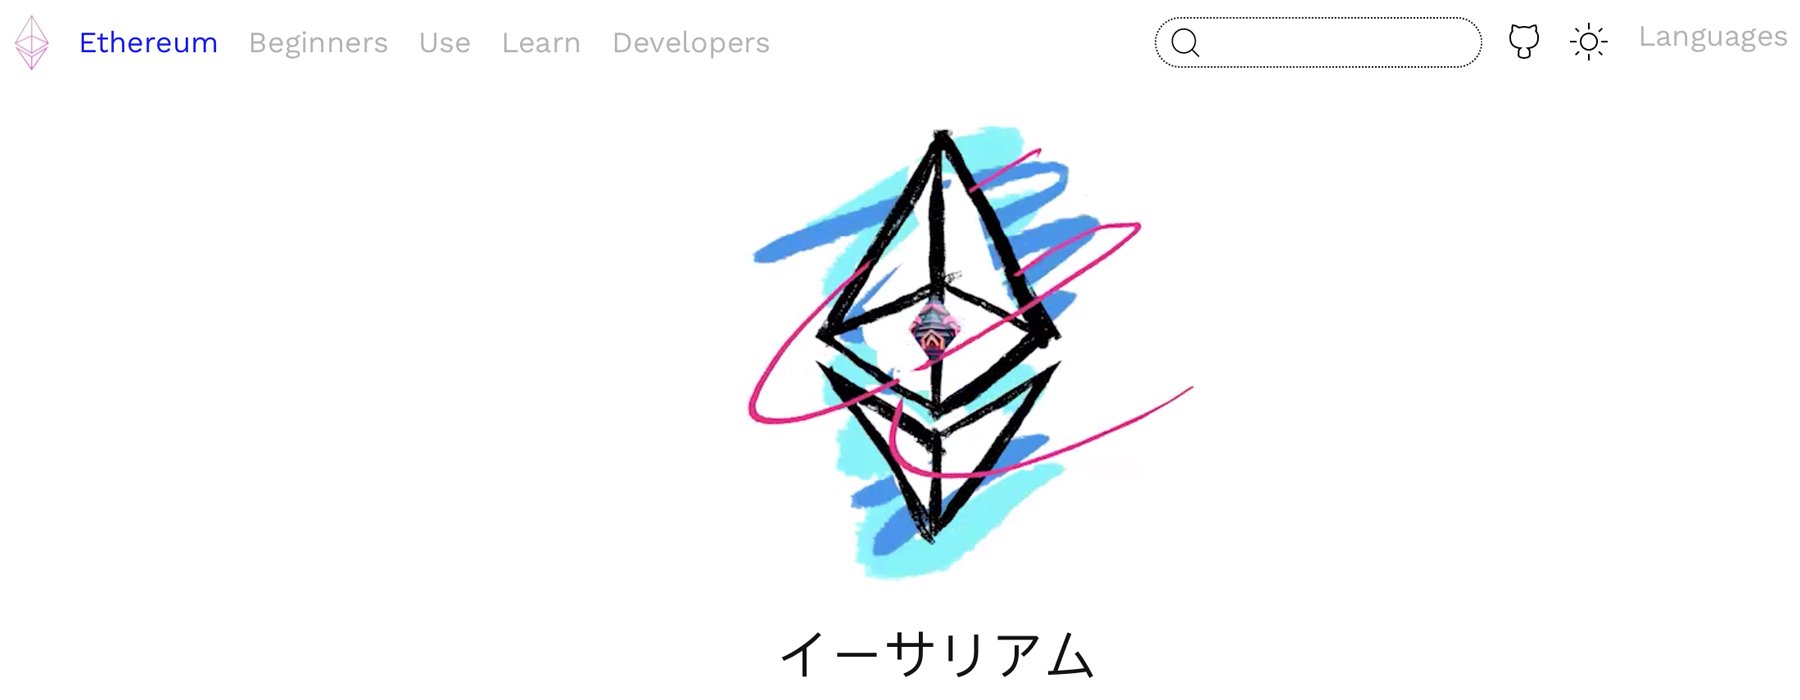 Ethereum Name Service Adds Infrastructure for Multi-Currency Support 